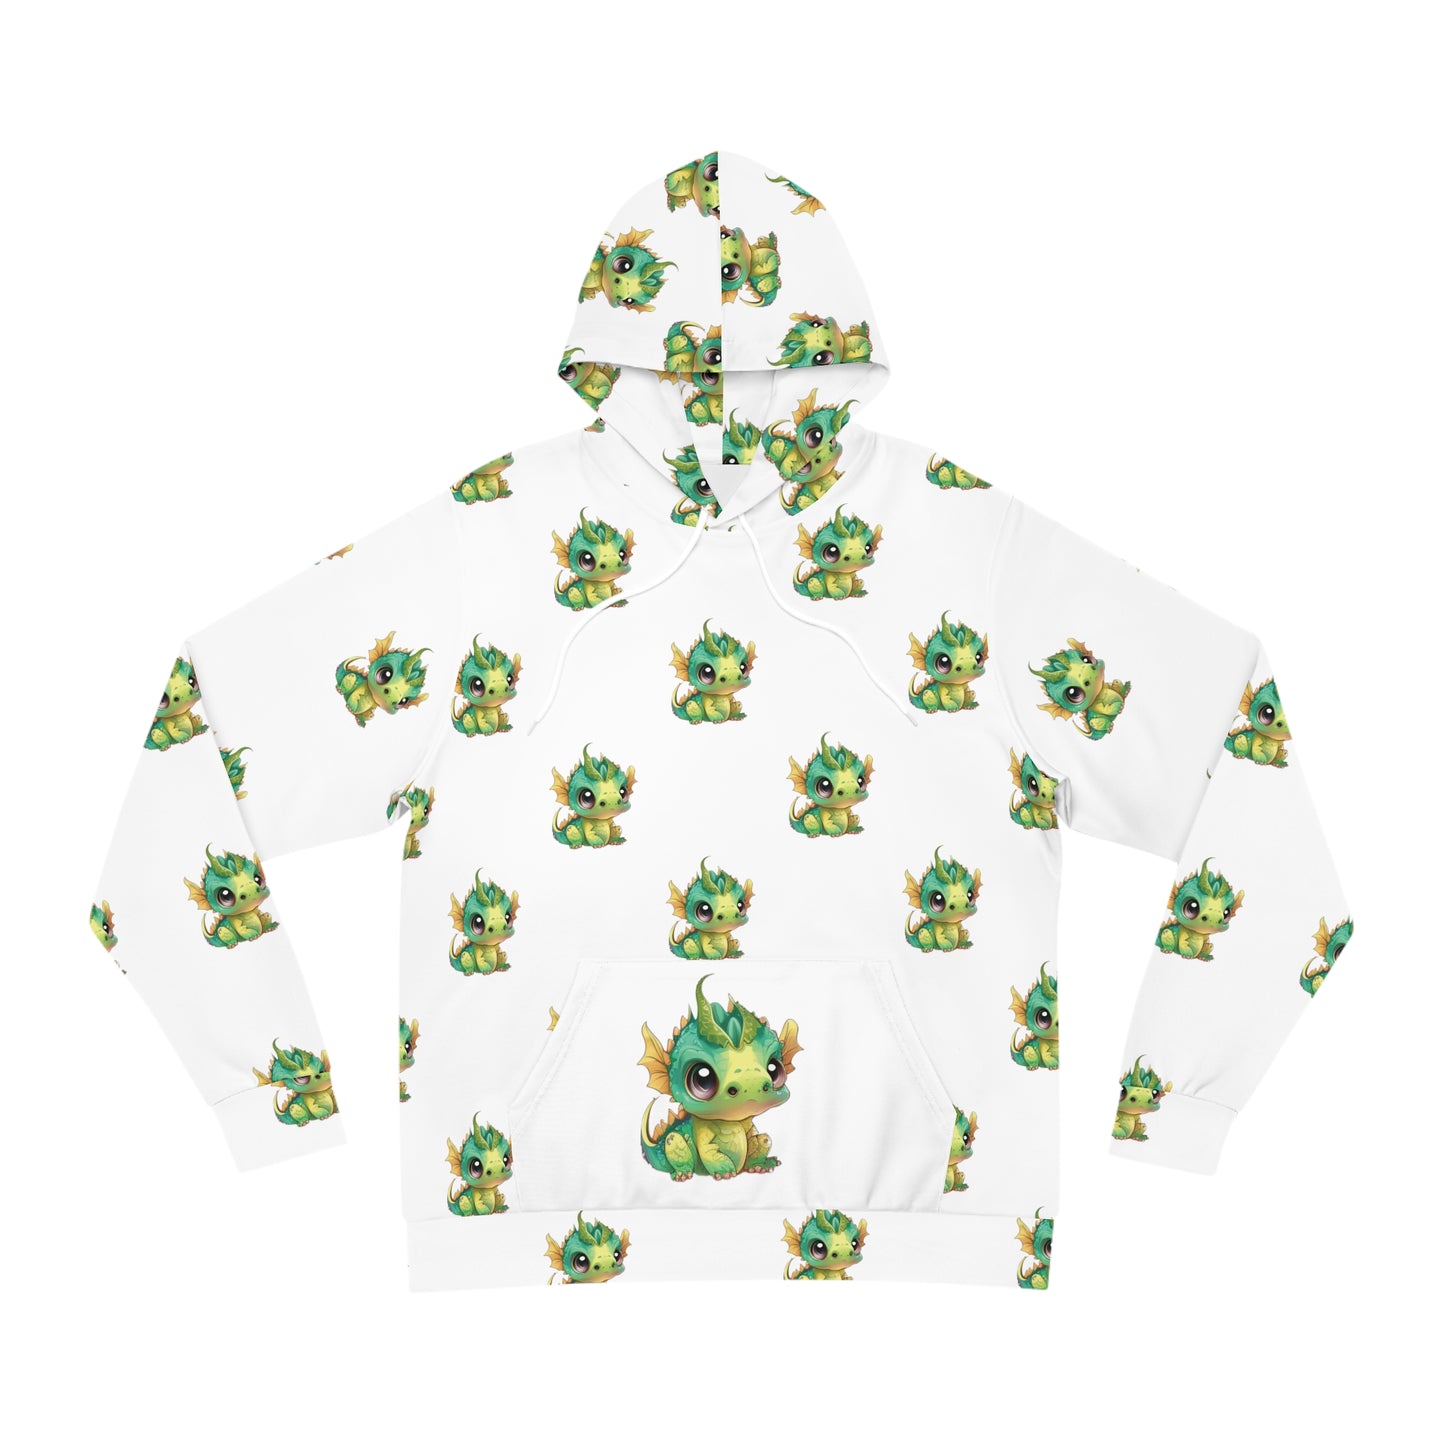 On a hoodie with a large front pocke sits a cute baby Bobby Dragon in greens yellows and a green baby horn - he is all over the hoody about 3 inches tall and 3 inches away from each other on this all over print hoody. 